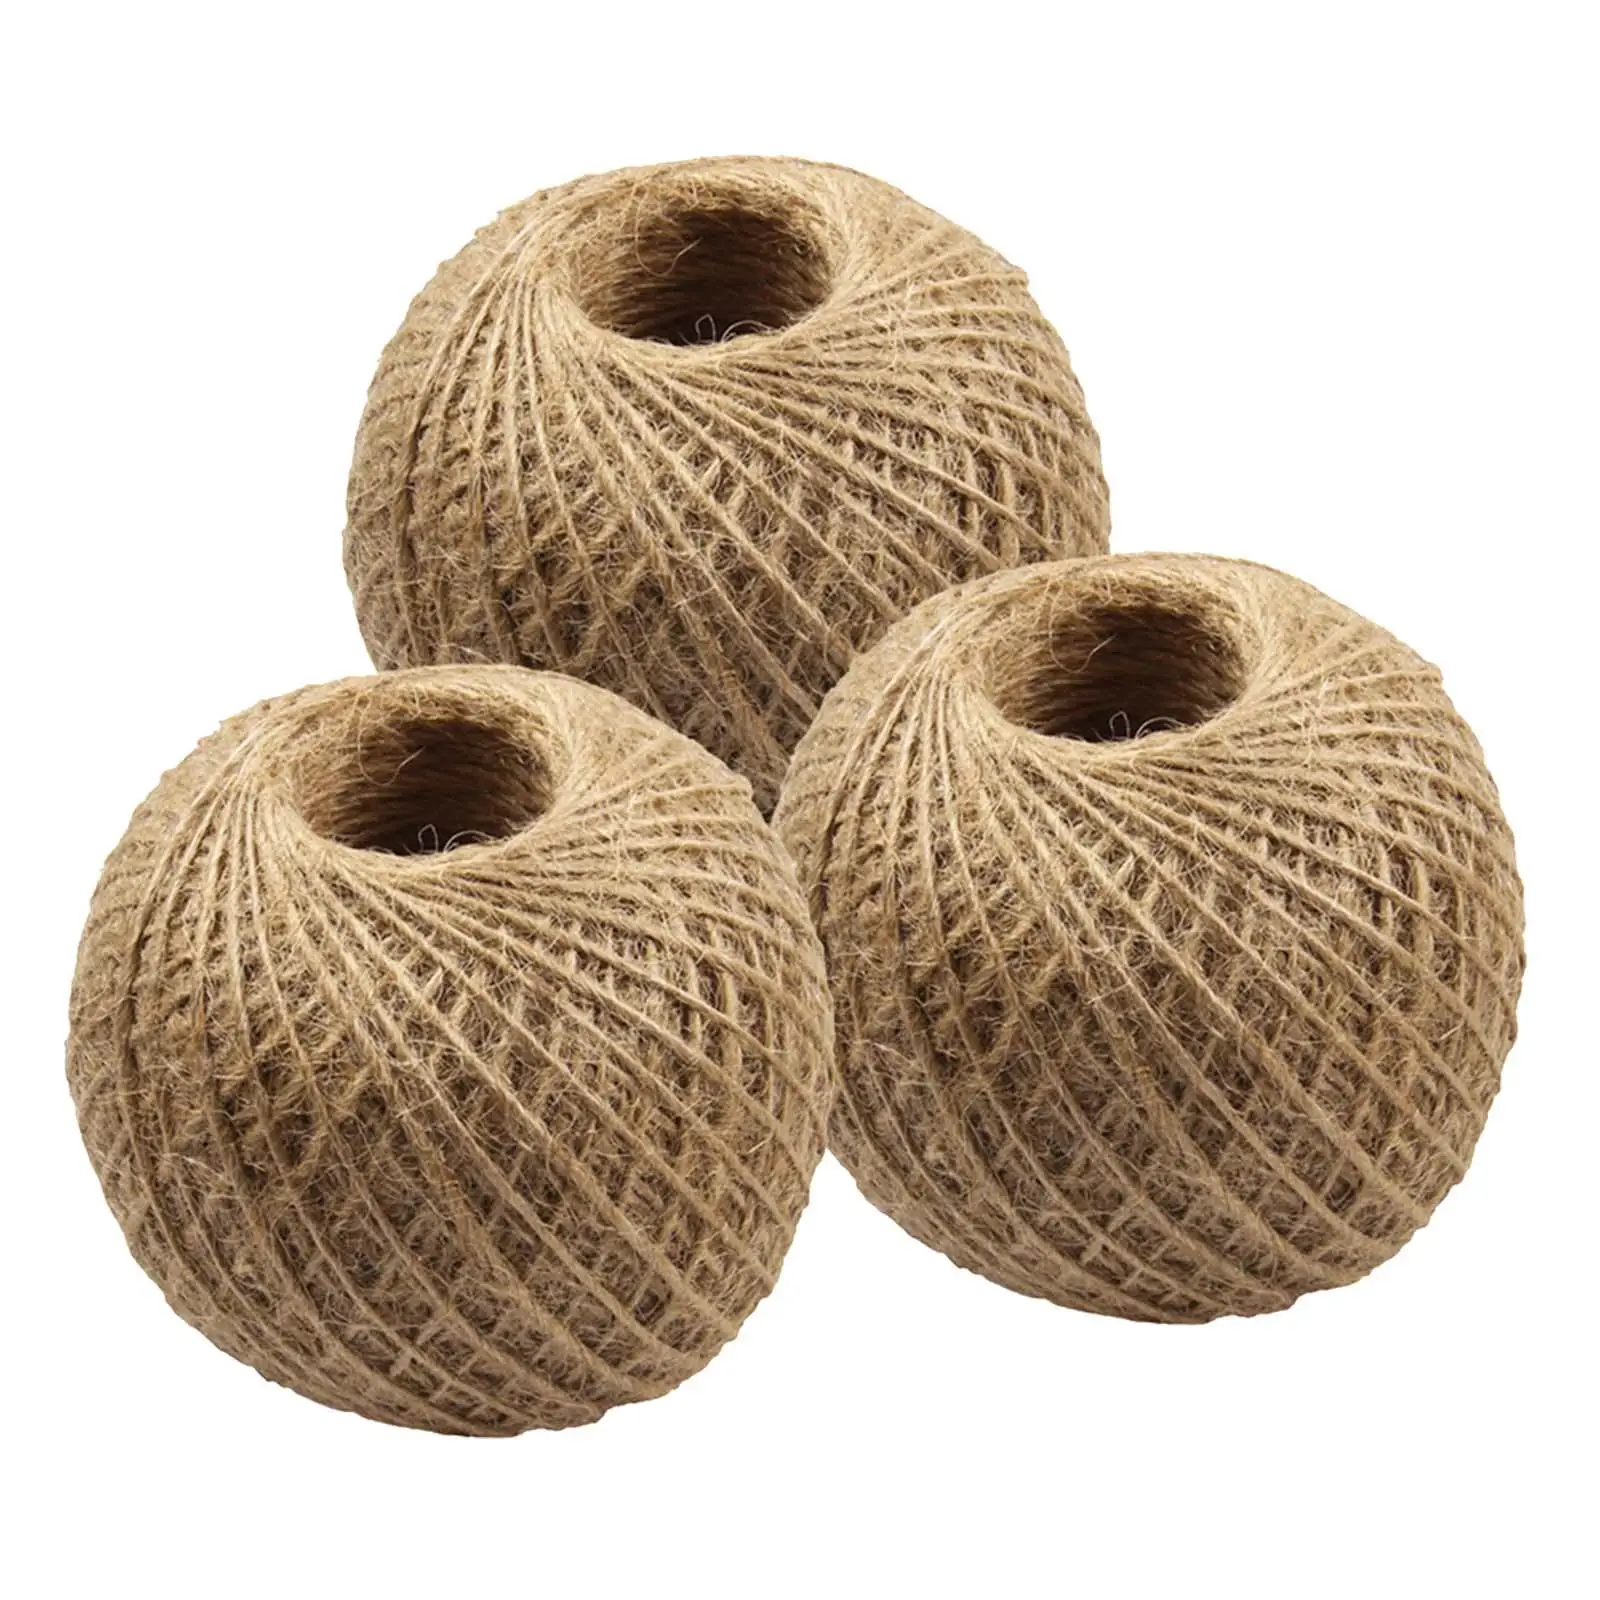 

3x Wedding Gift Wrap Decorative String 80M 2mm Hemp Cord Jute Rope String for Artworks Gardening Industrial Packing Materials